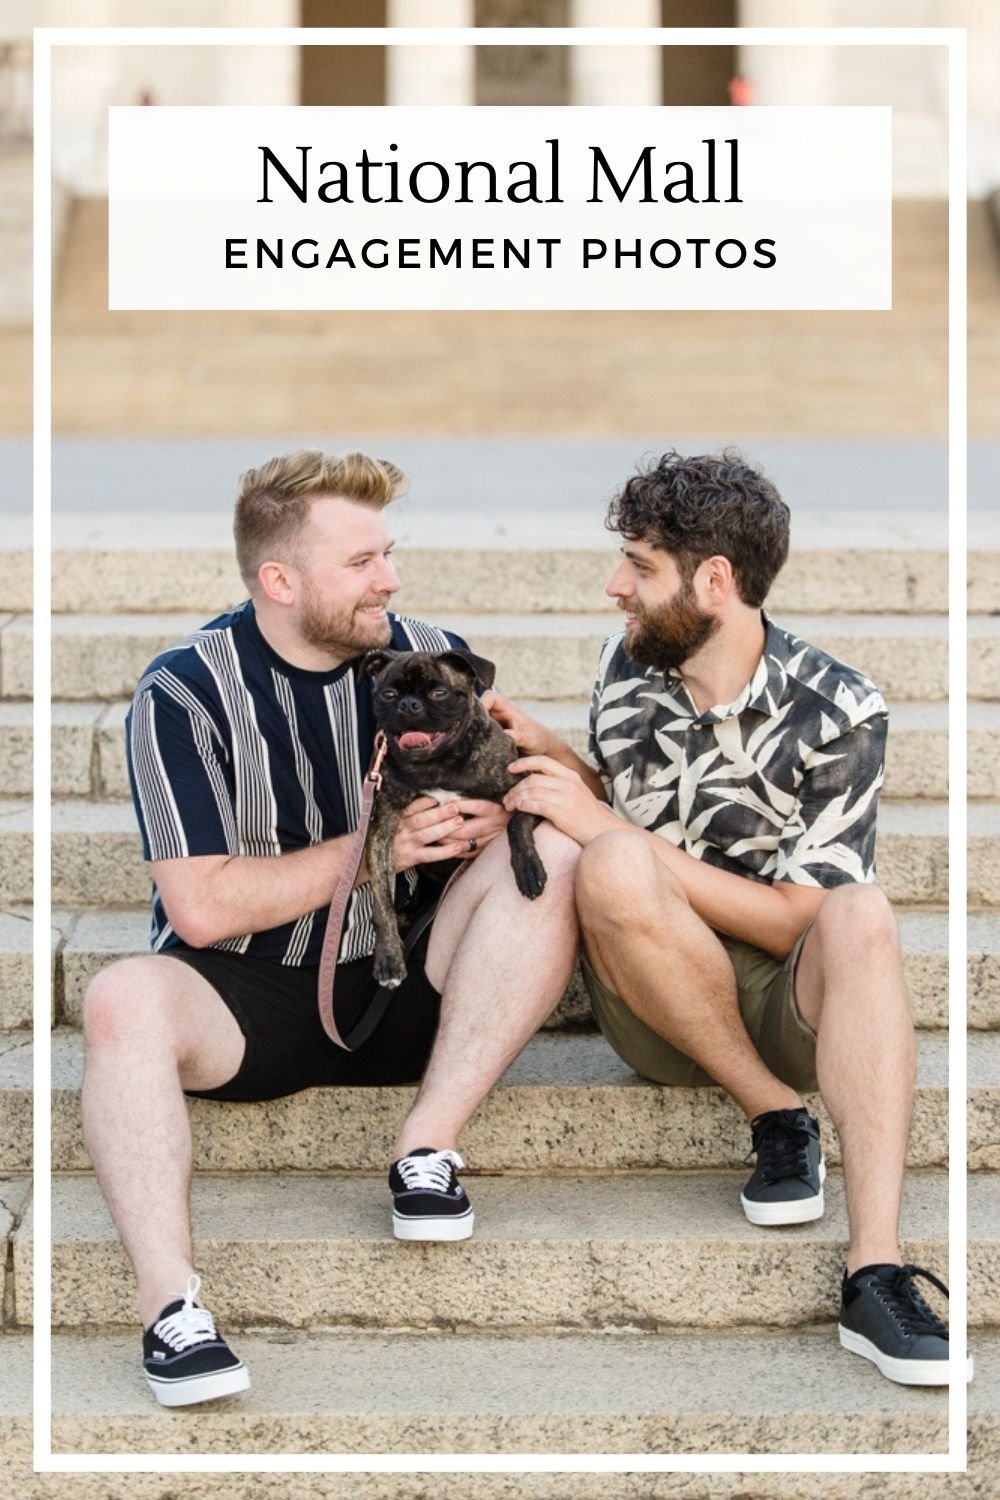 National Mall DC LGBTQ engagement pictures